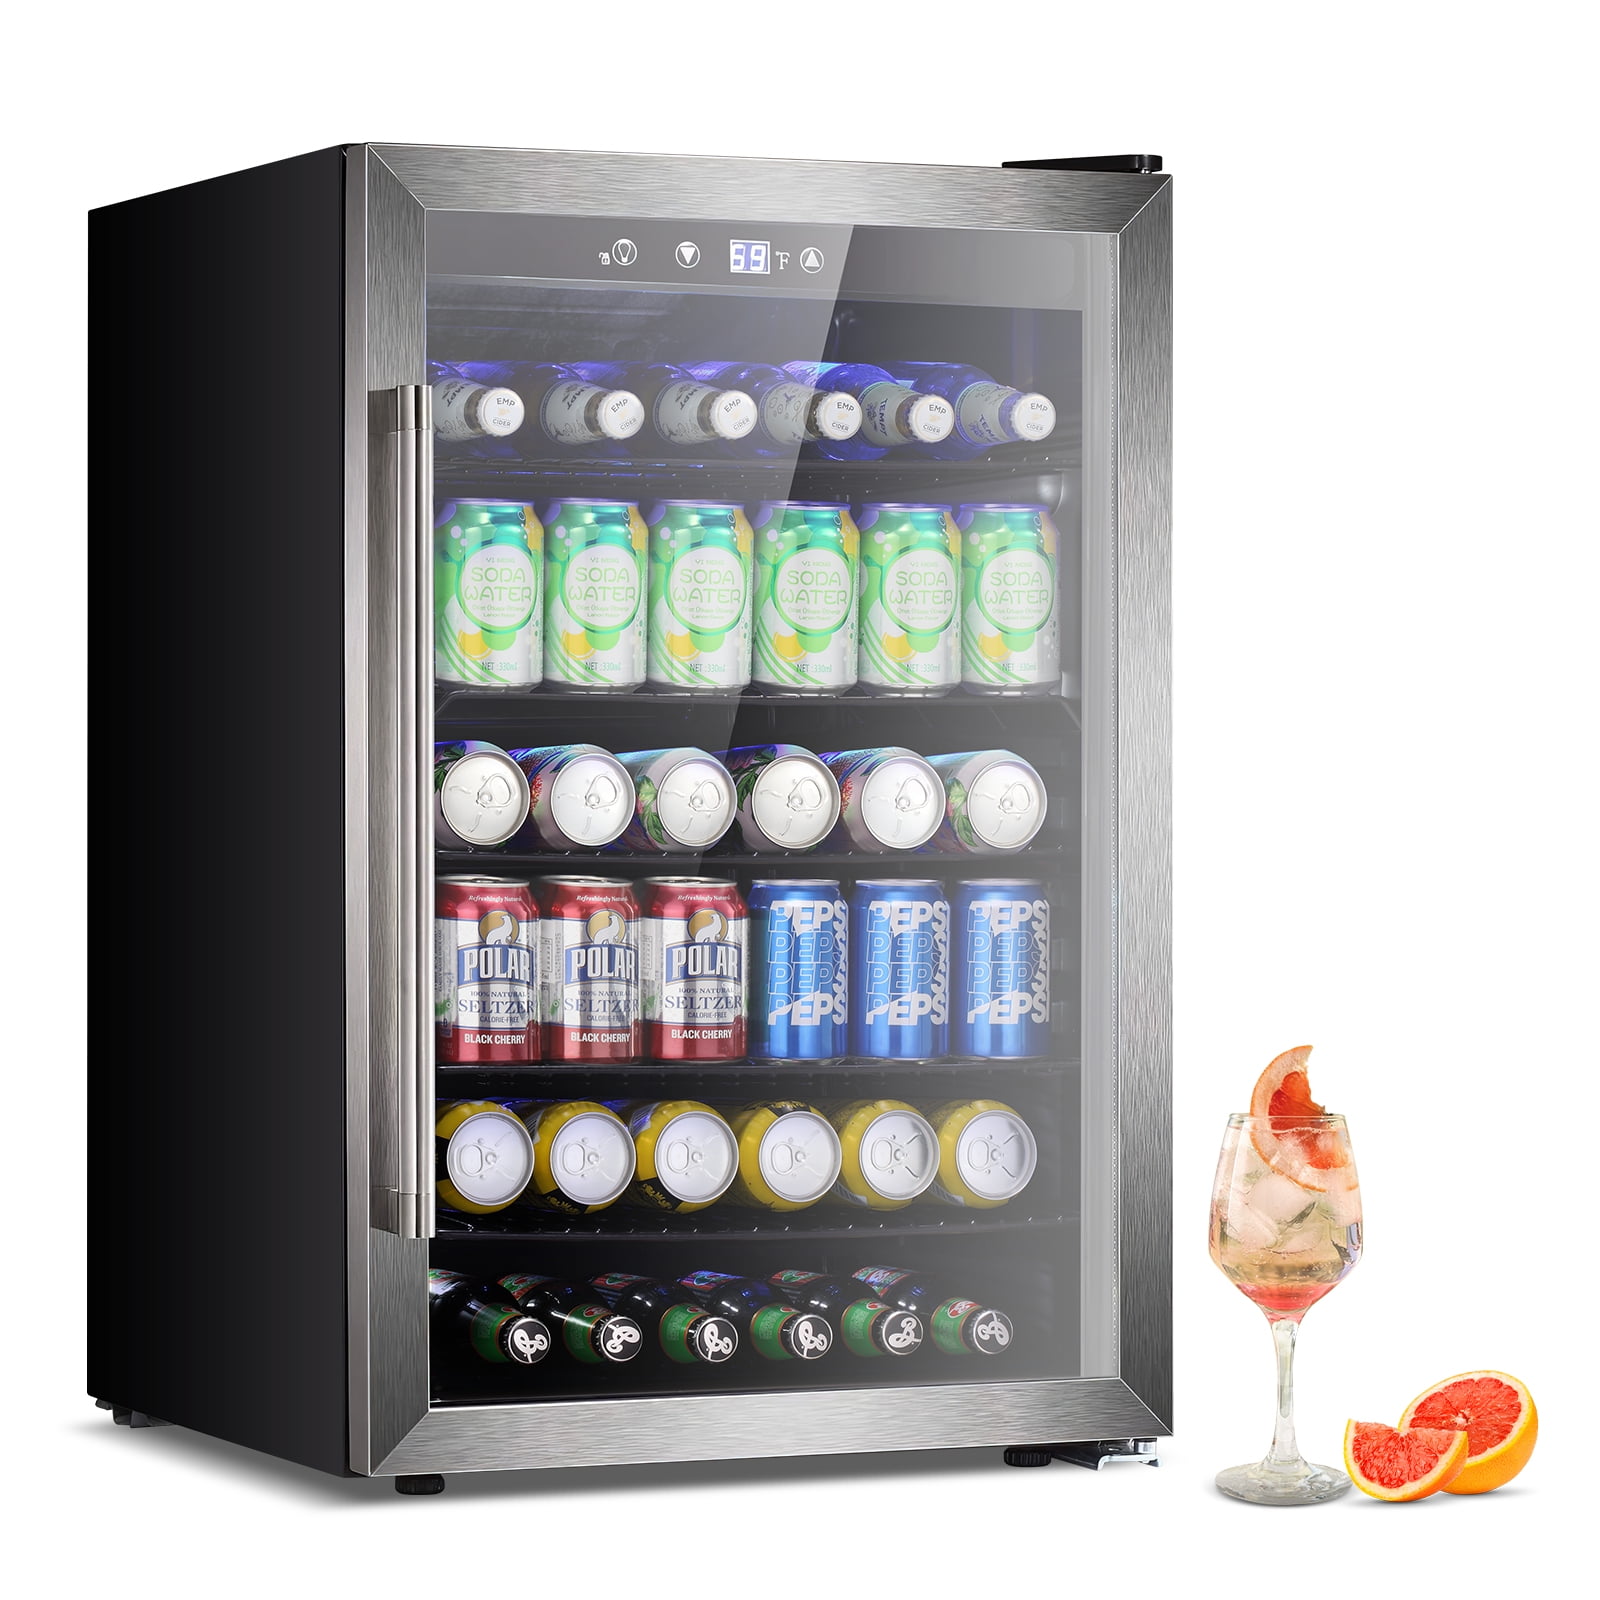 COOLHOME Beverage Refrigerator and Cooler - 85 Can Mini Fridge